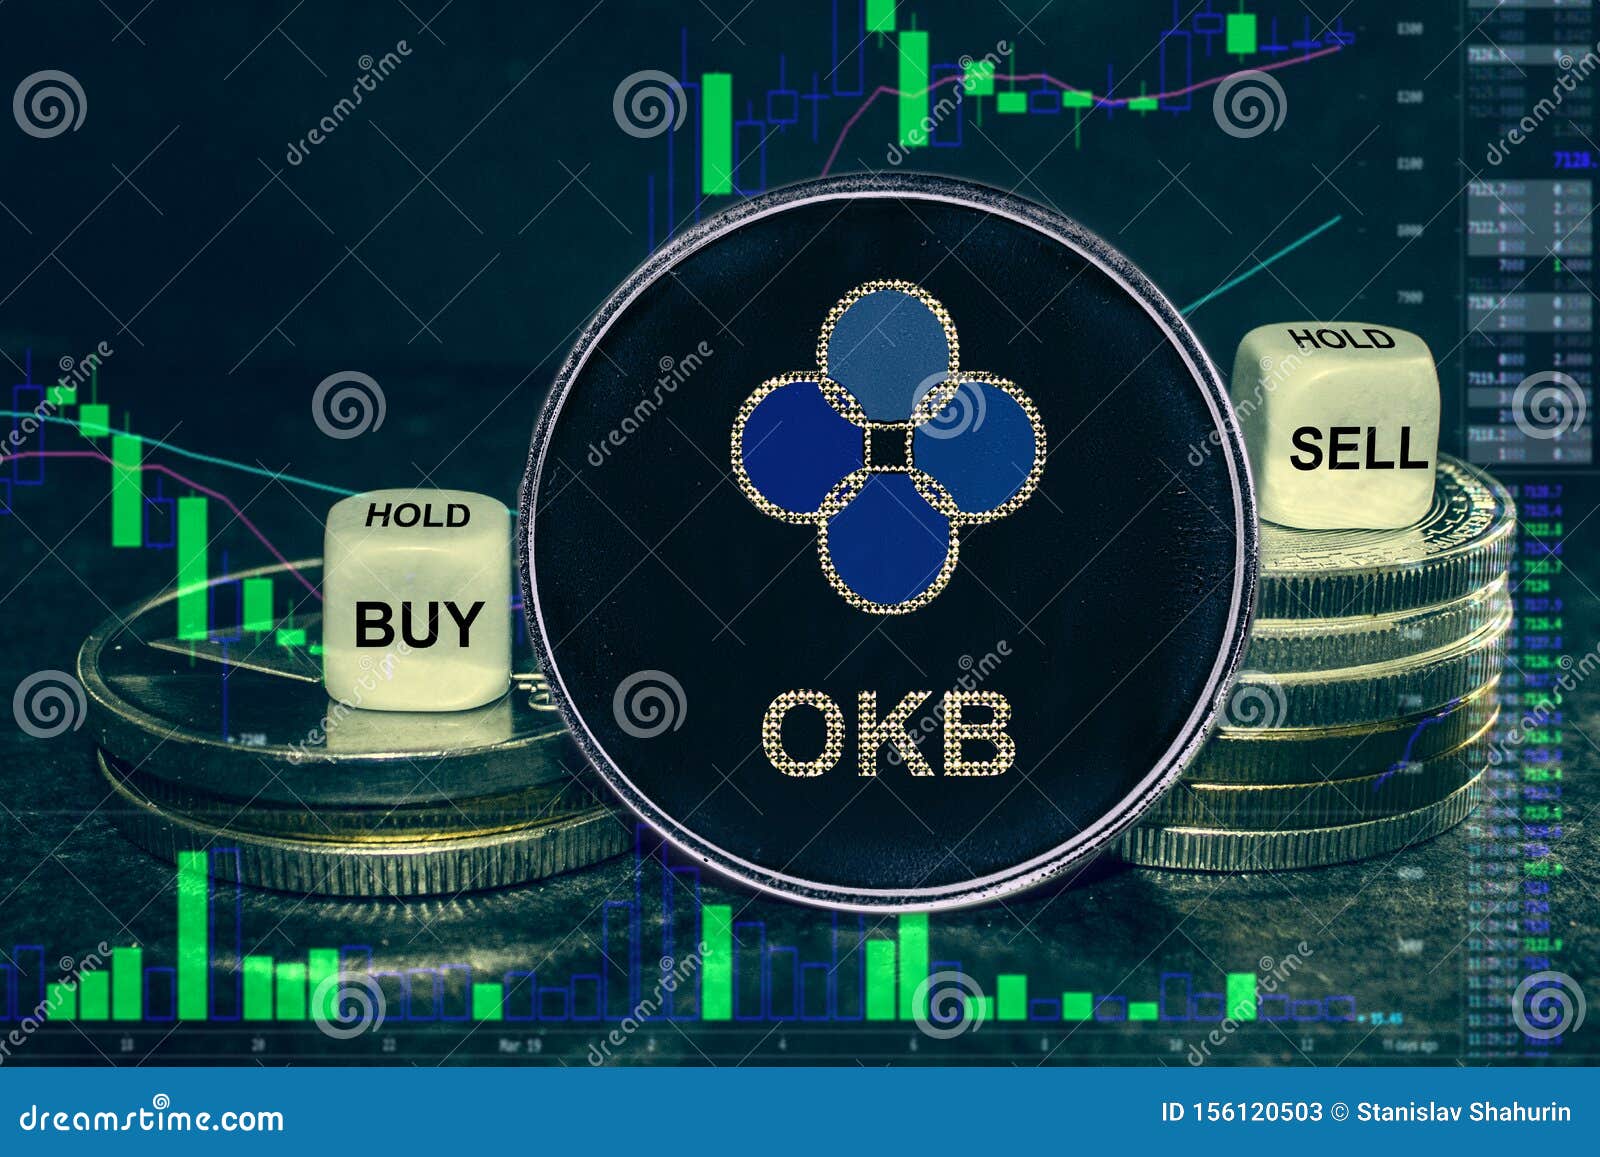 Coin Cryptocurrency Okb Okex Stack Of Coins And Dice ...